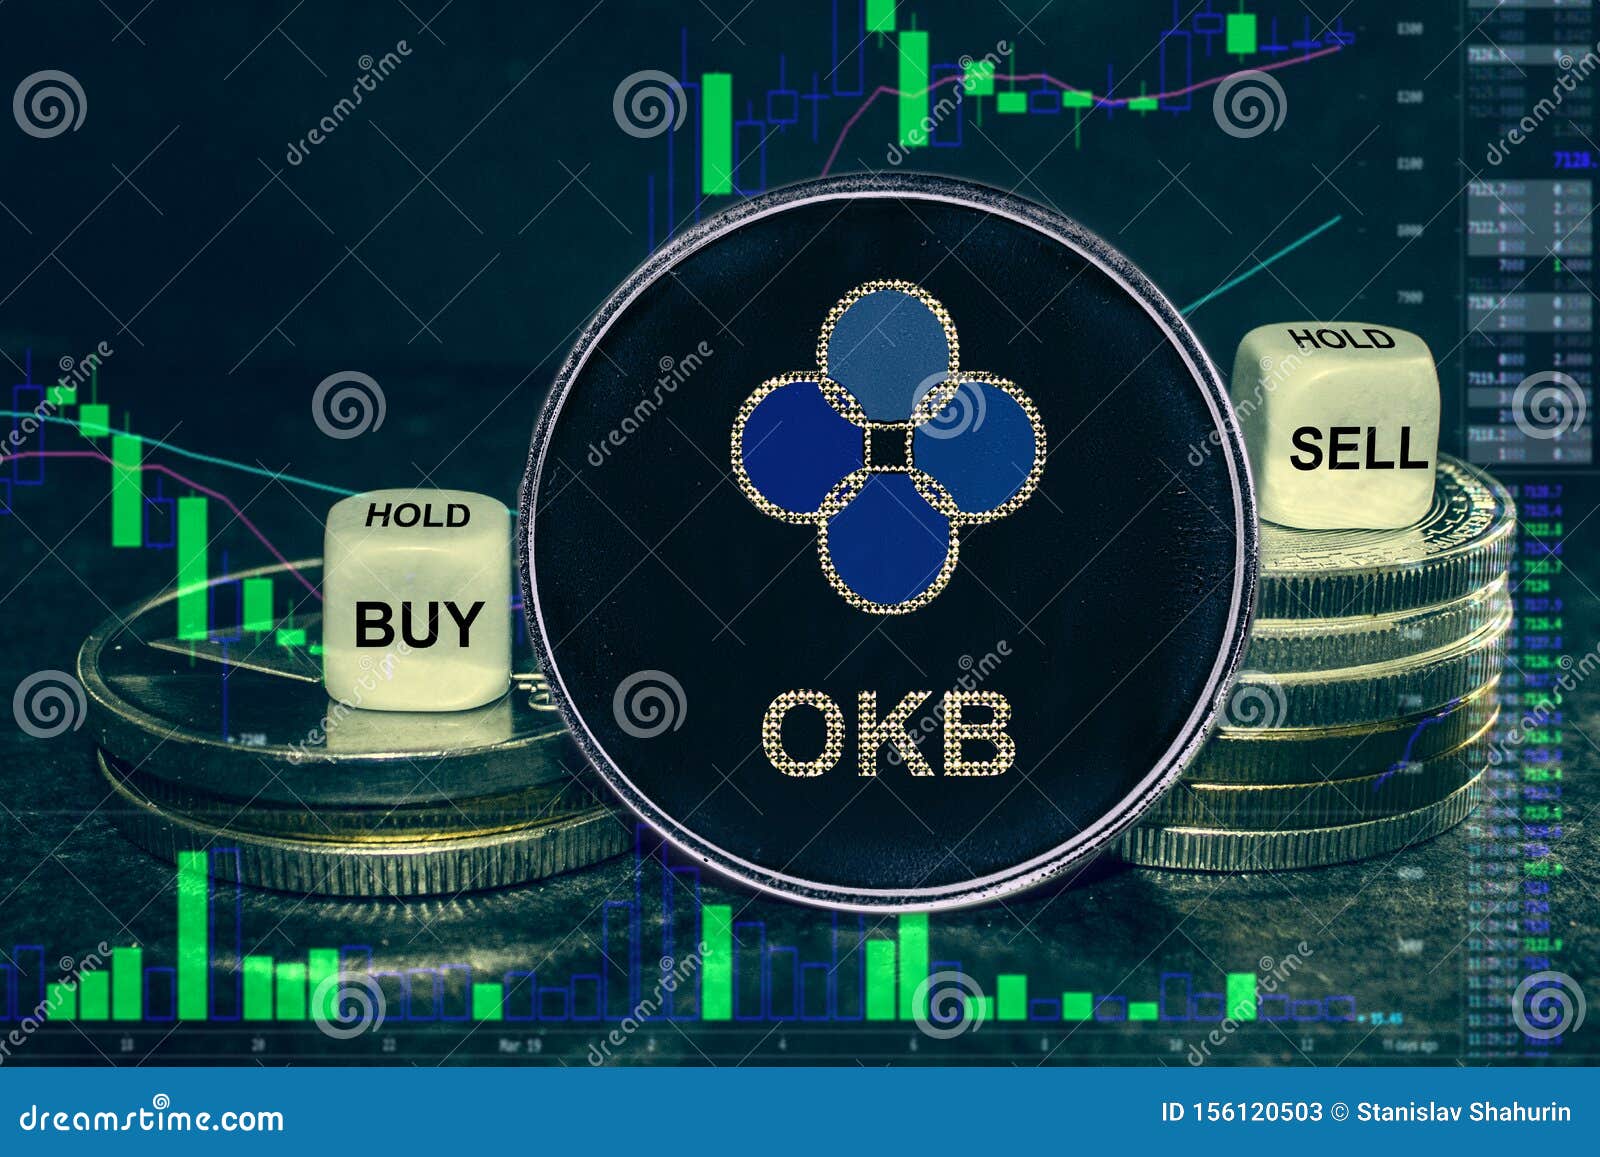 Coin Cryptocurrency Okb Okex Stack Of Coins And Dice ...